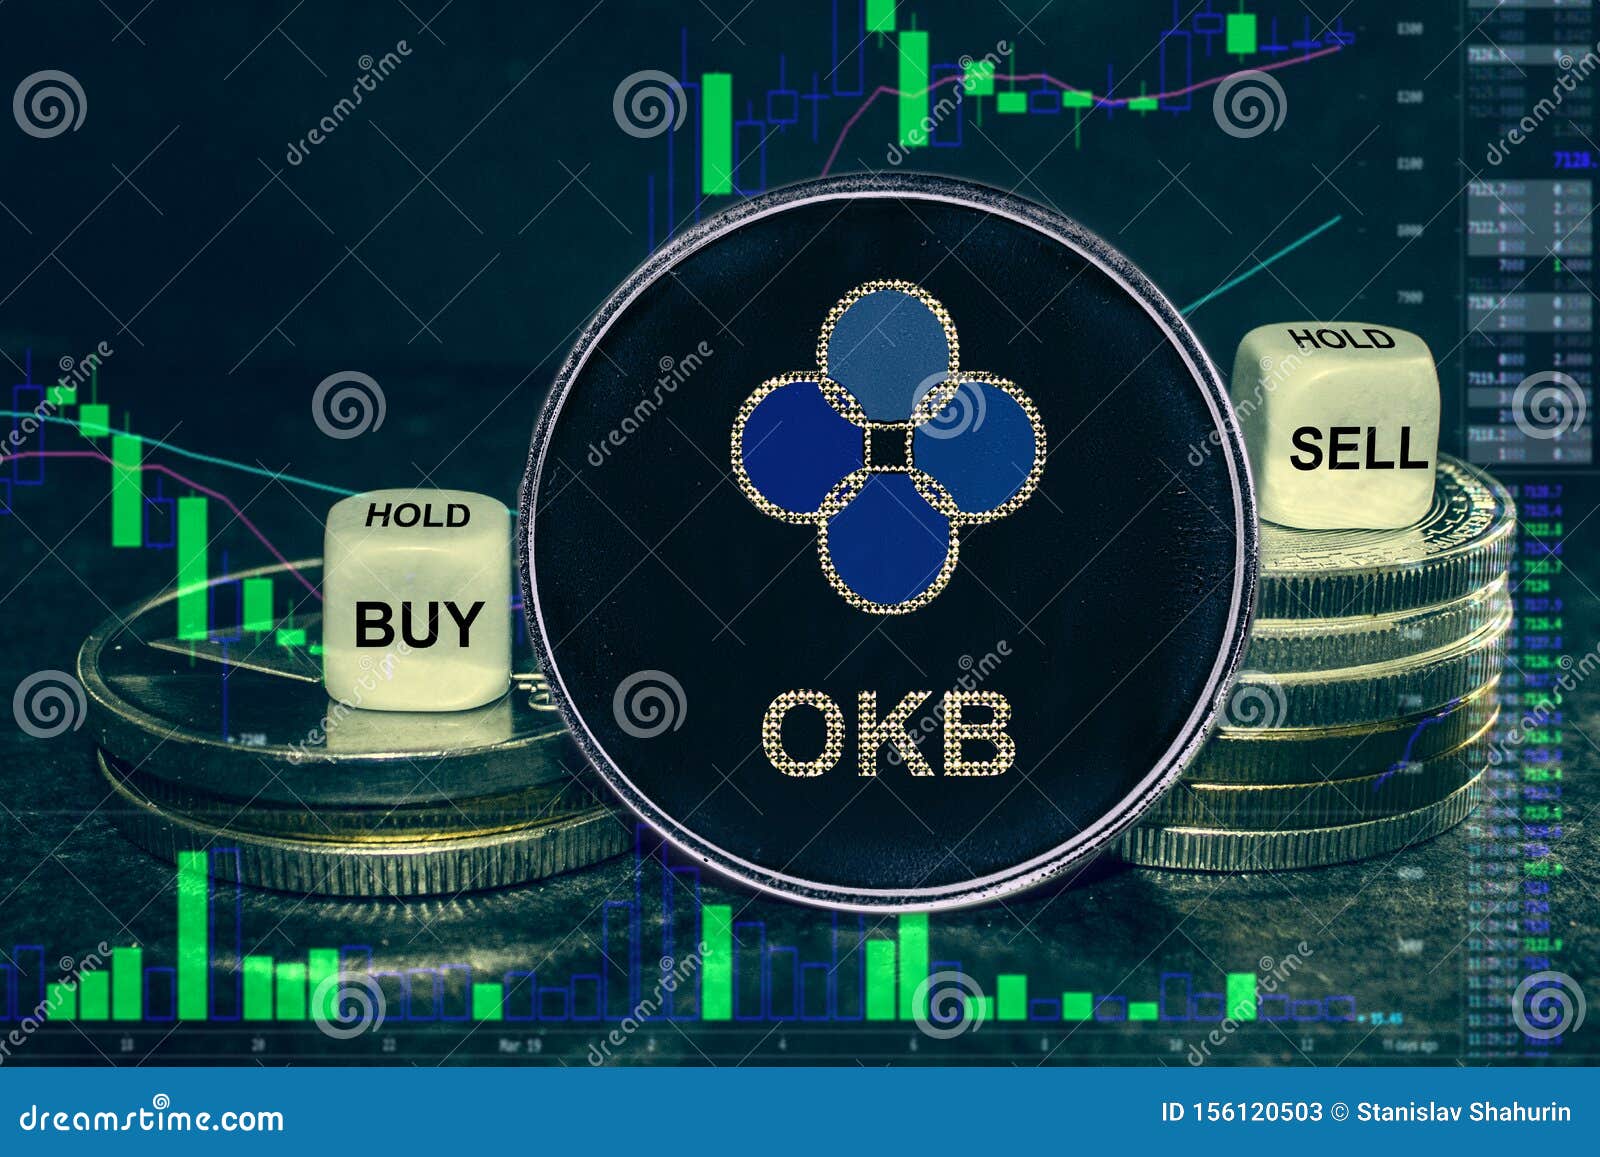 Coin Cryptocurrency Okb Okex Stack Of Coins And Dice ...